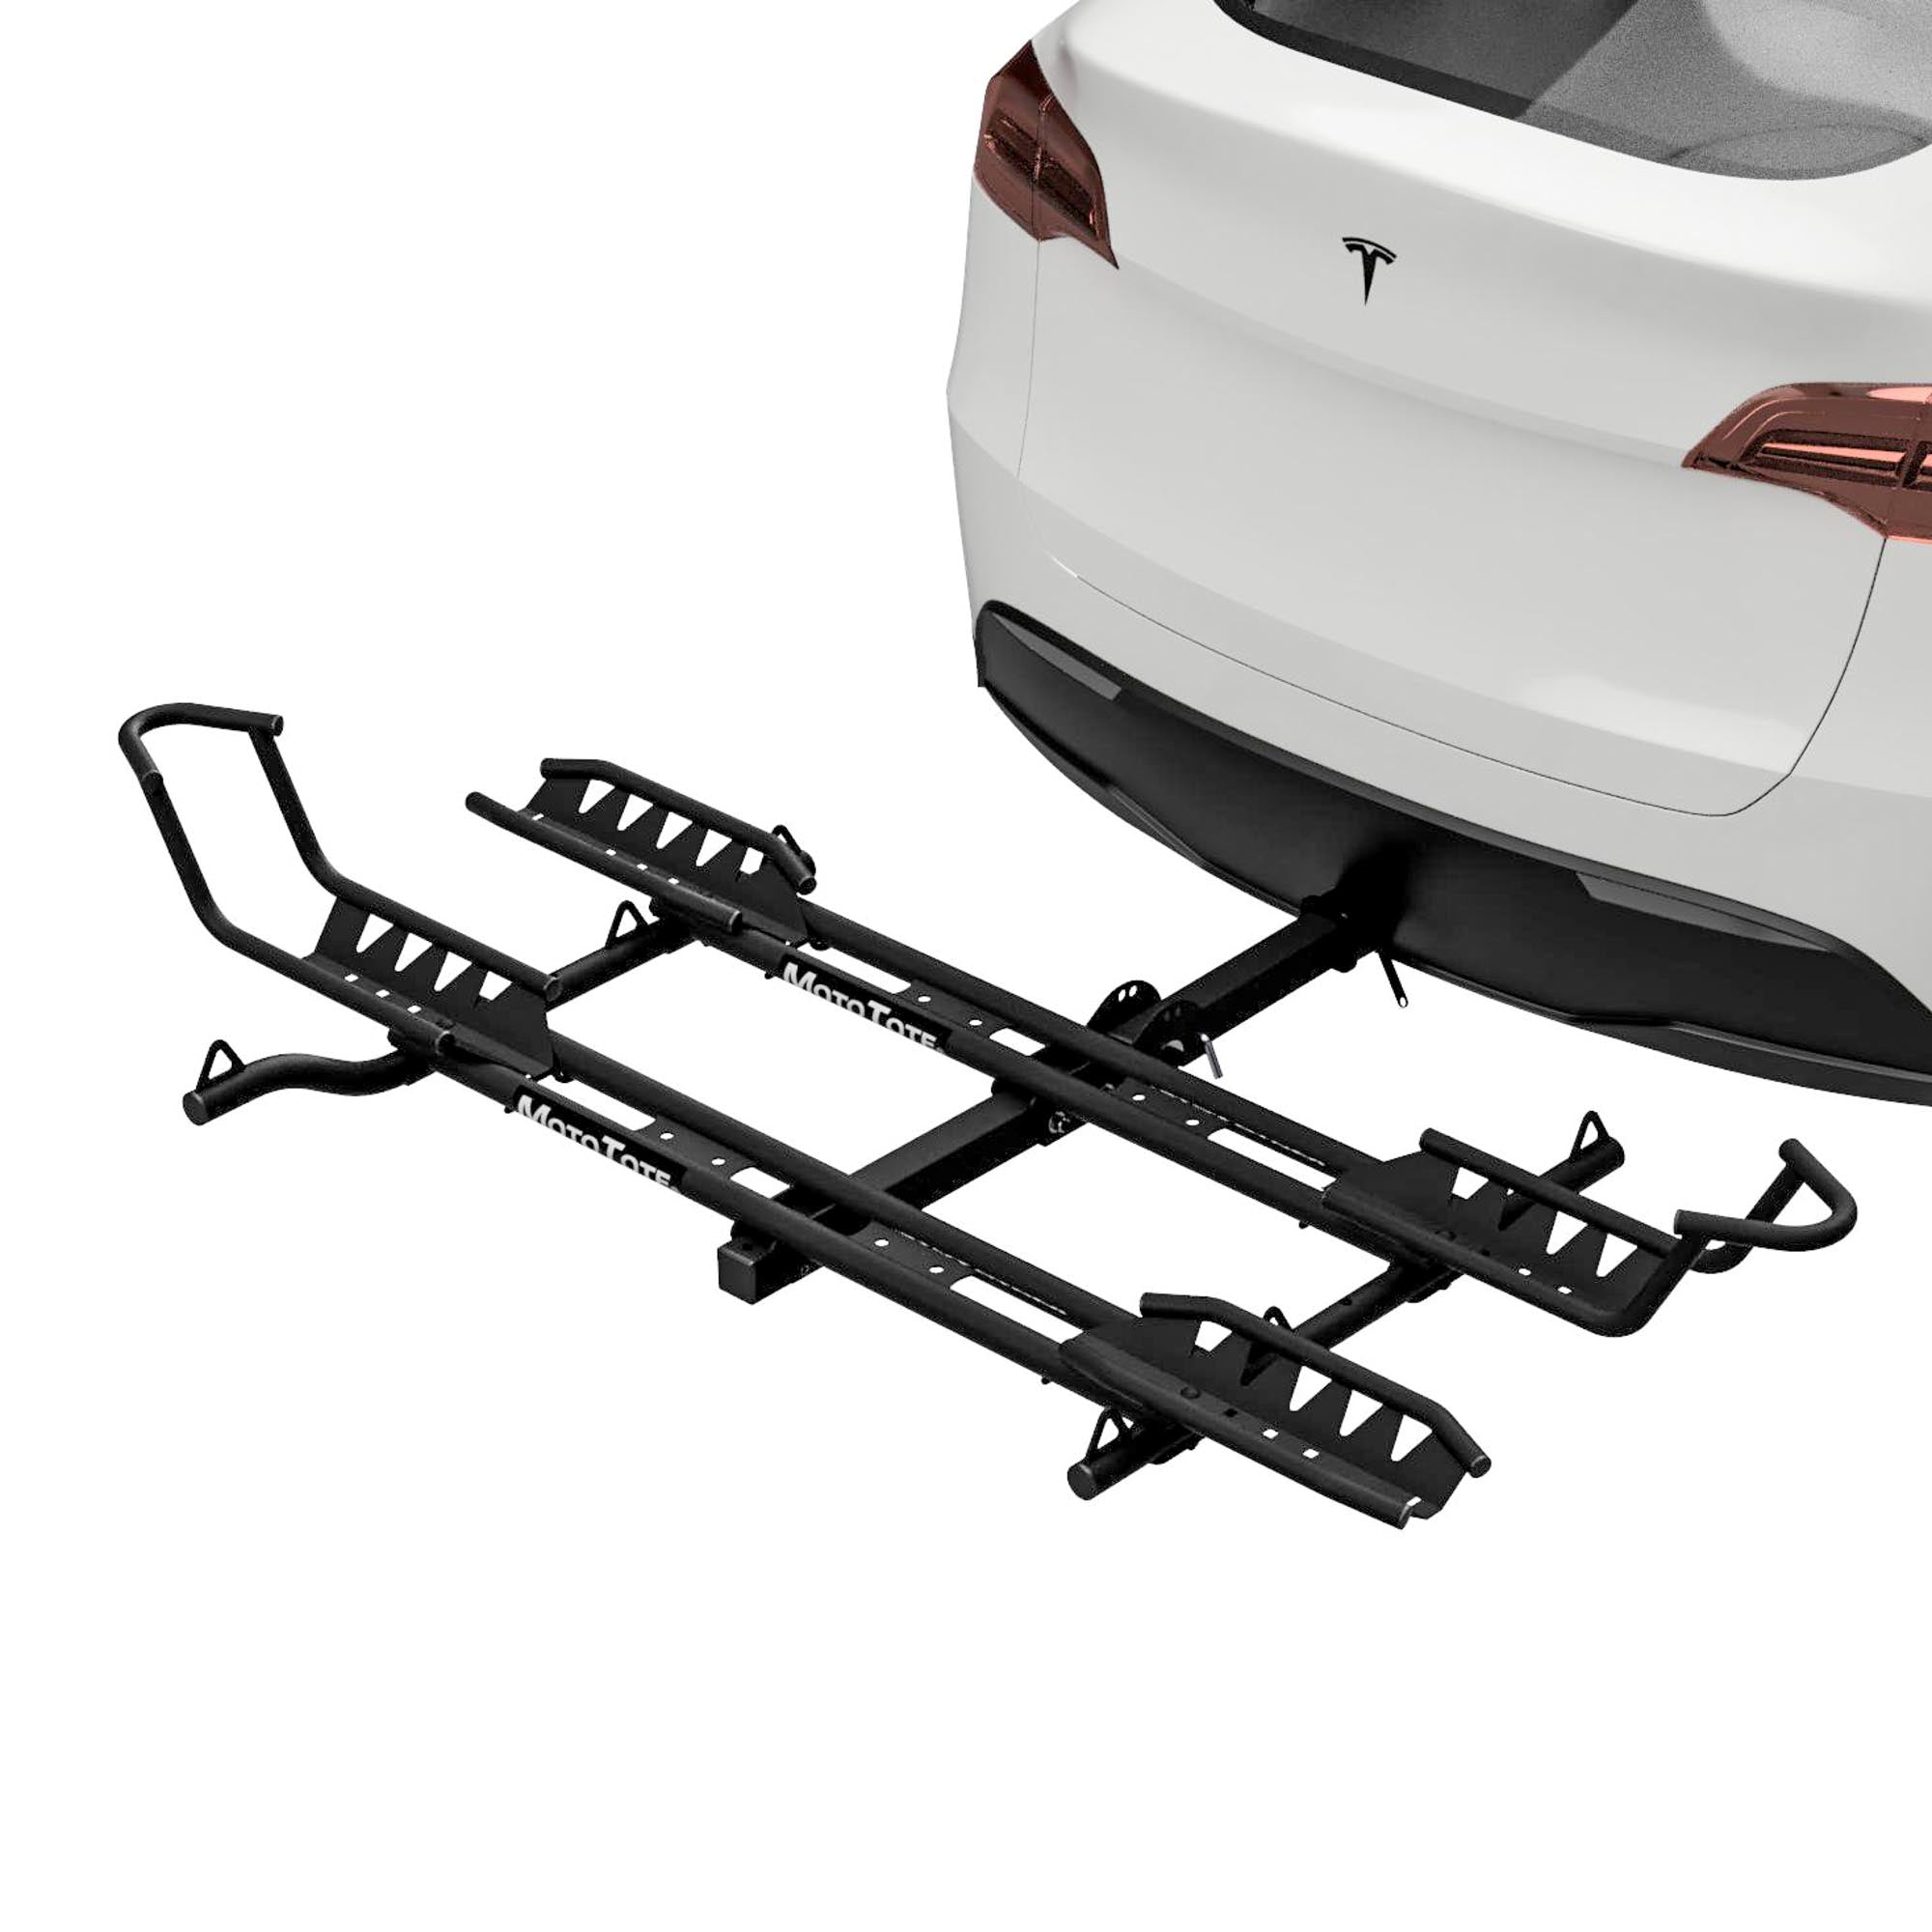 Simple, Easy-Stow Compact Trailer-Hitch Motorcycle Towing